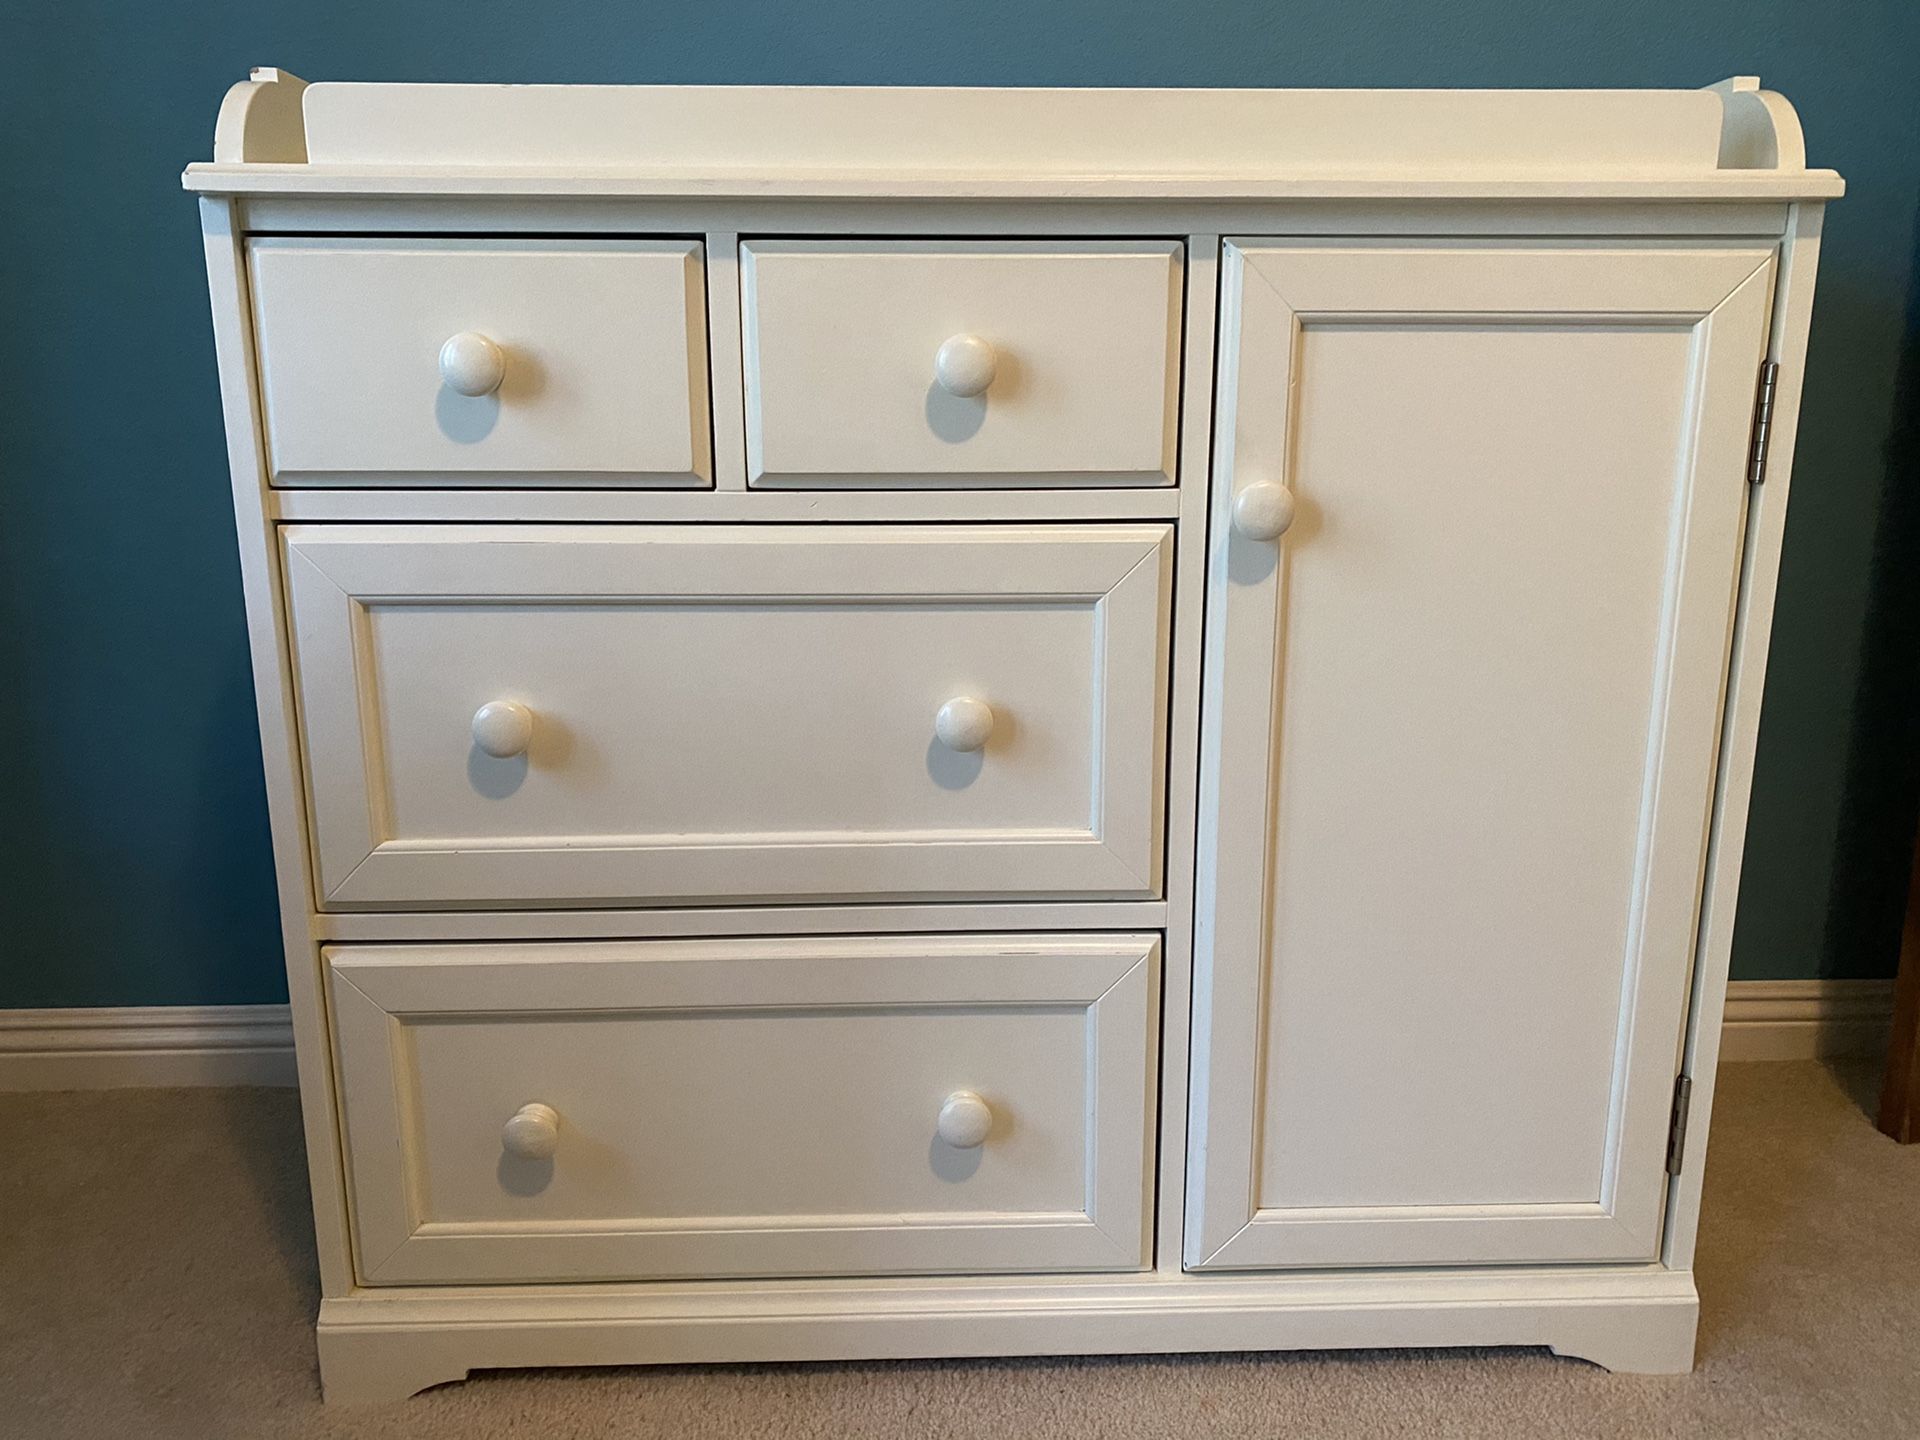 Pottery Barn Madison Changing Table